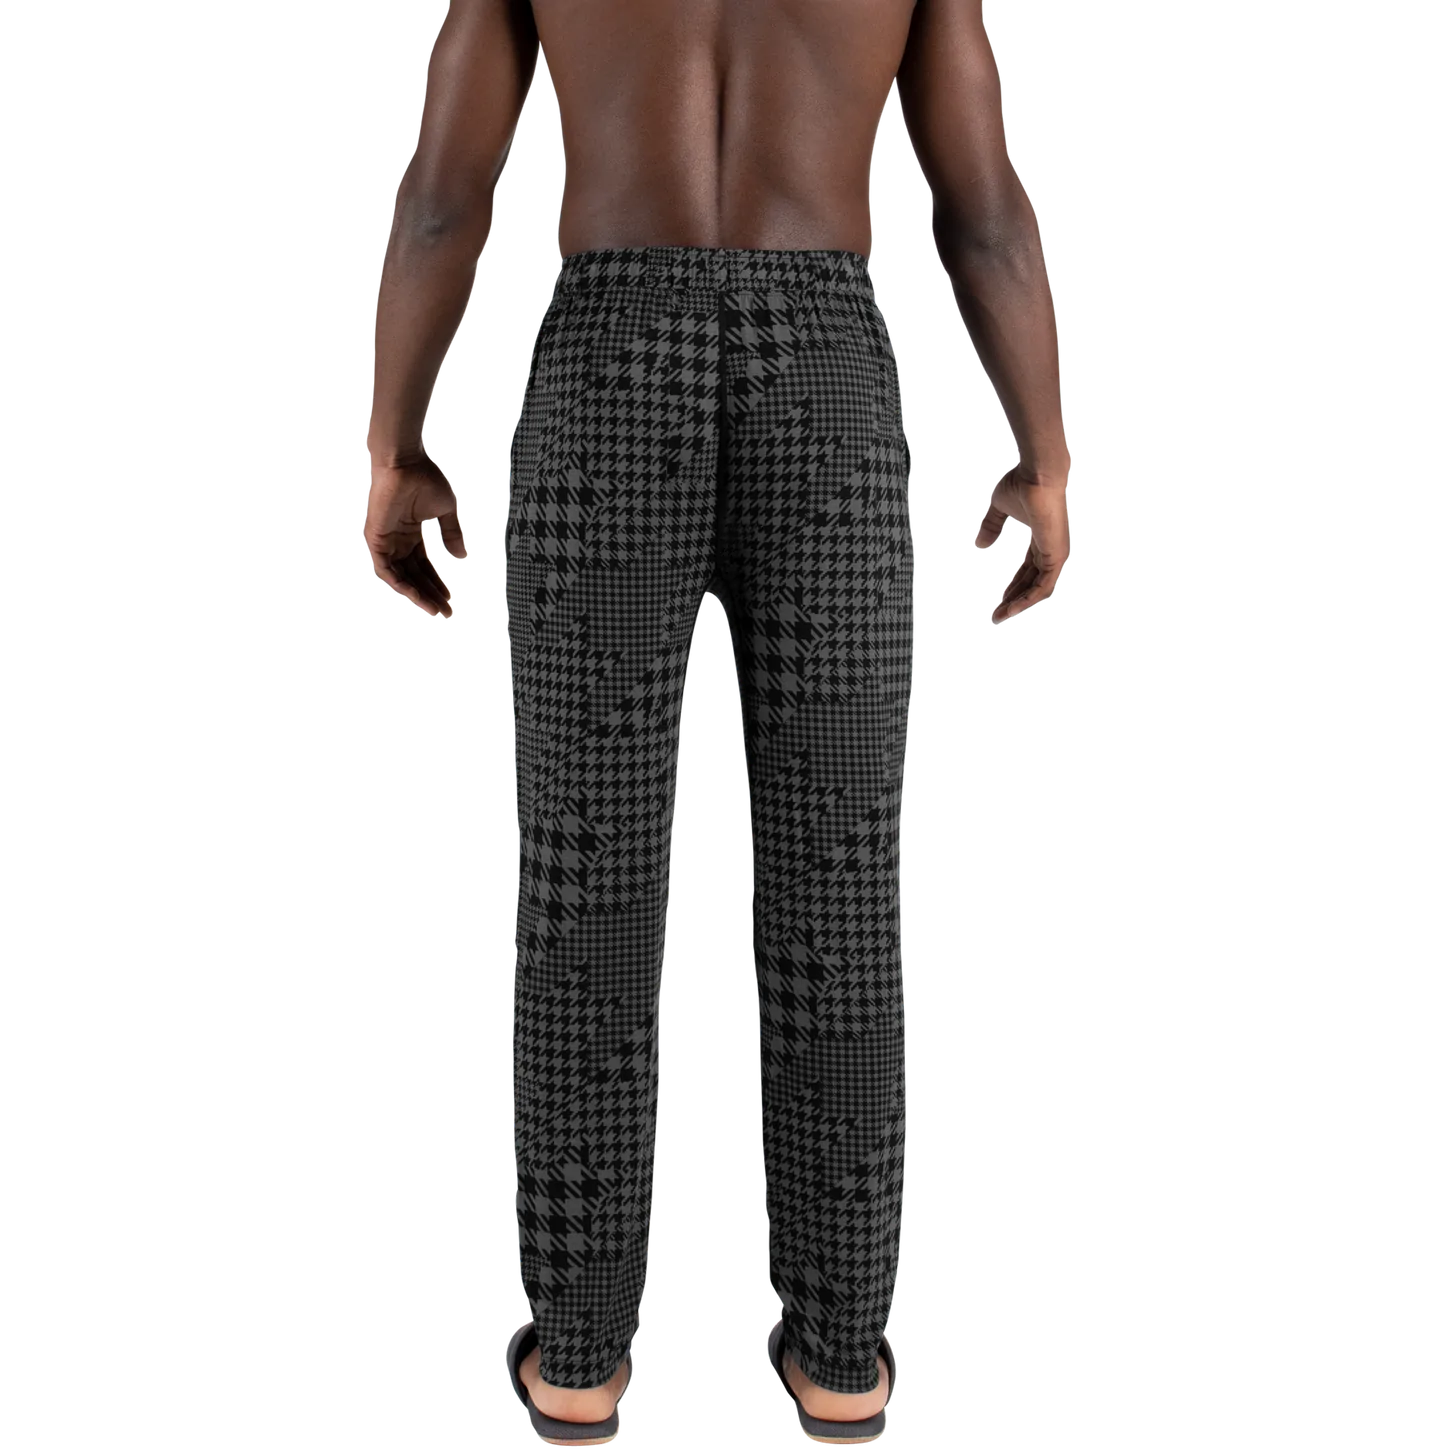 Saxx Mens 22nd Century Silky Lounge Pant